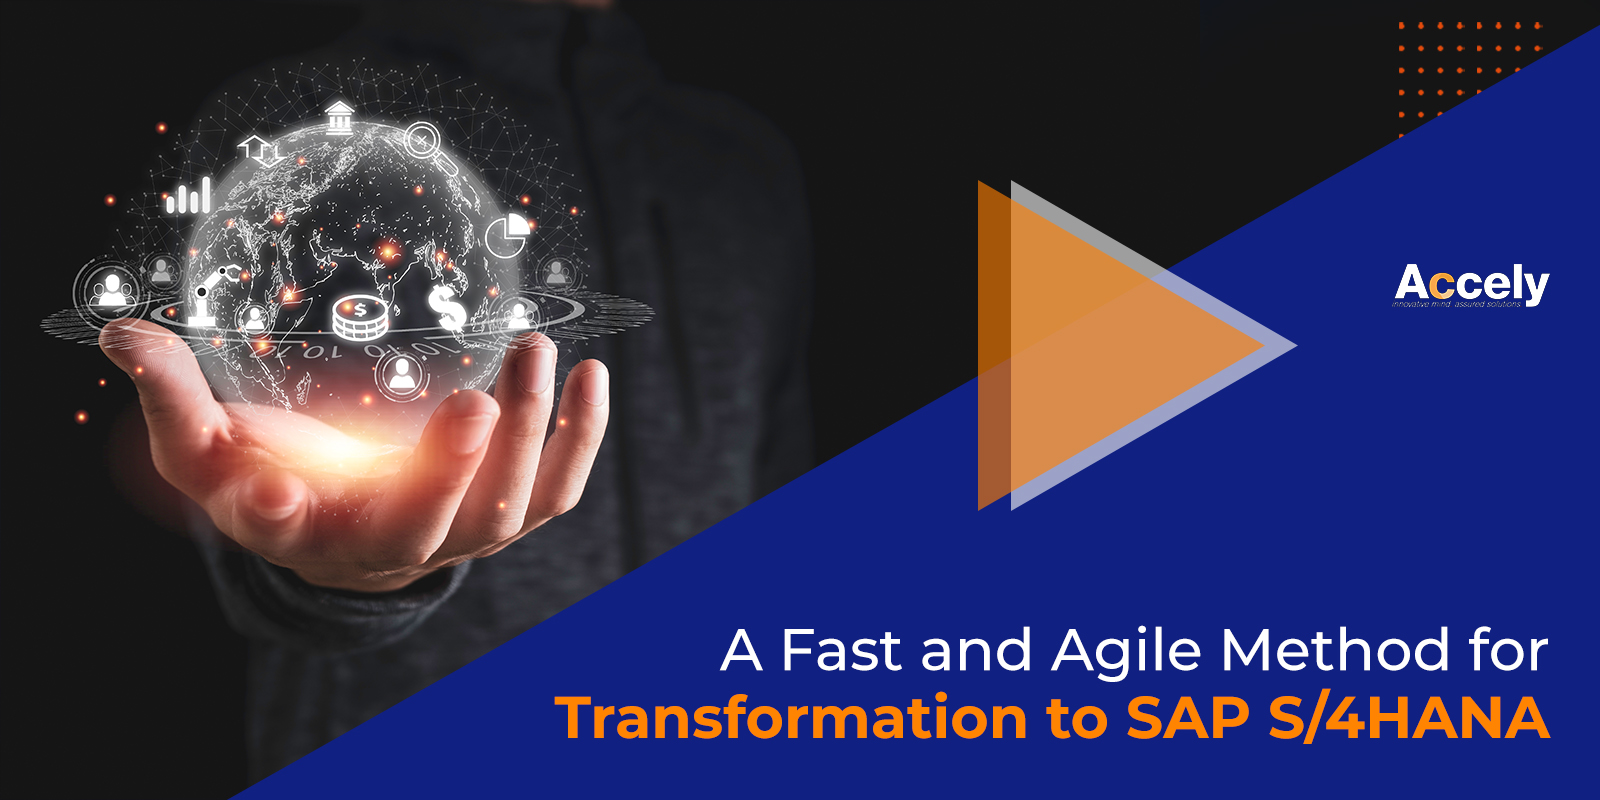 A Fast and Agile method for transformation to SAP S/4HANA